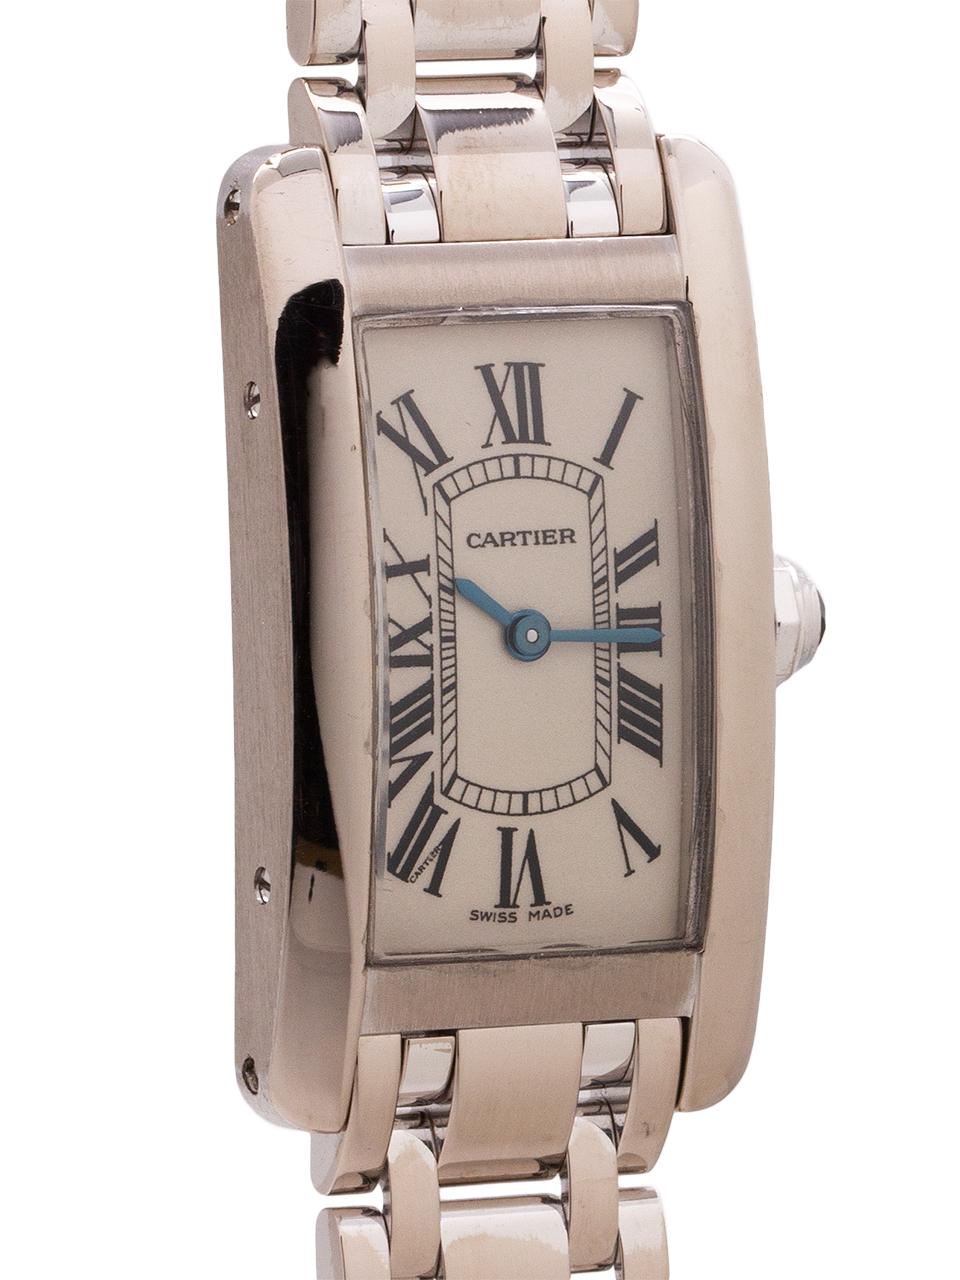 Classic Cartier lady’s 18K white gold Tank American ref W26019L01 circa 1990’s. Featuring classic curvex style 19 X 34.8mm case secured by 4 side screws and 8 caseback screws. With original classic silvered dial with Roman figures with Cartier